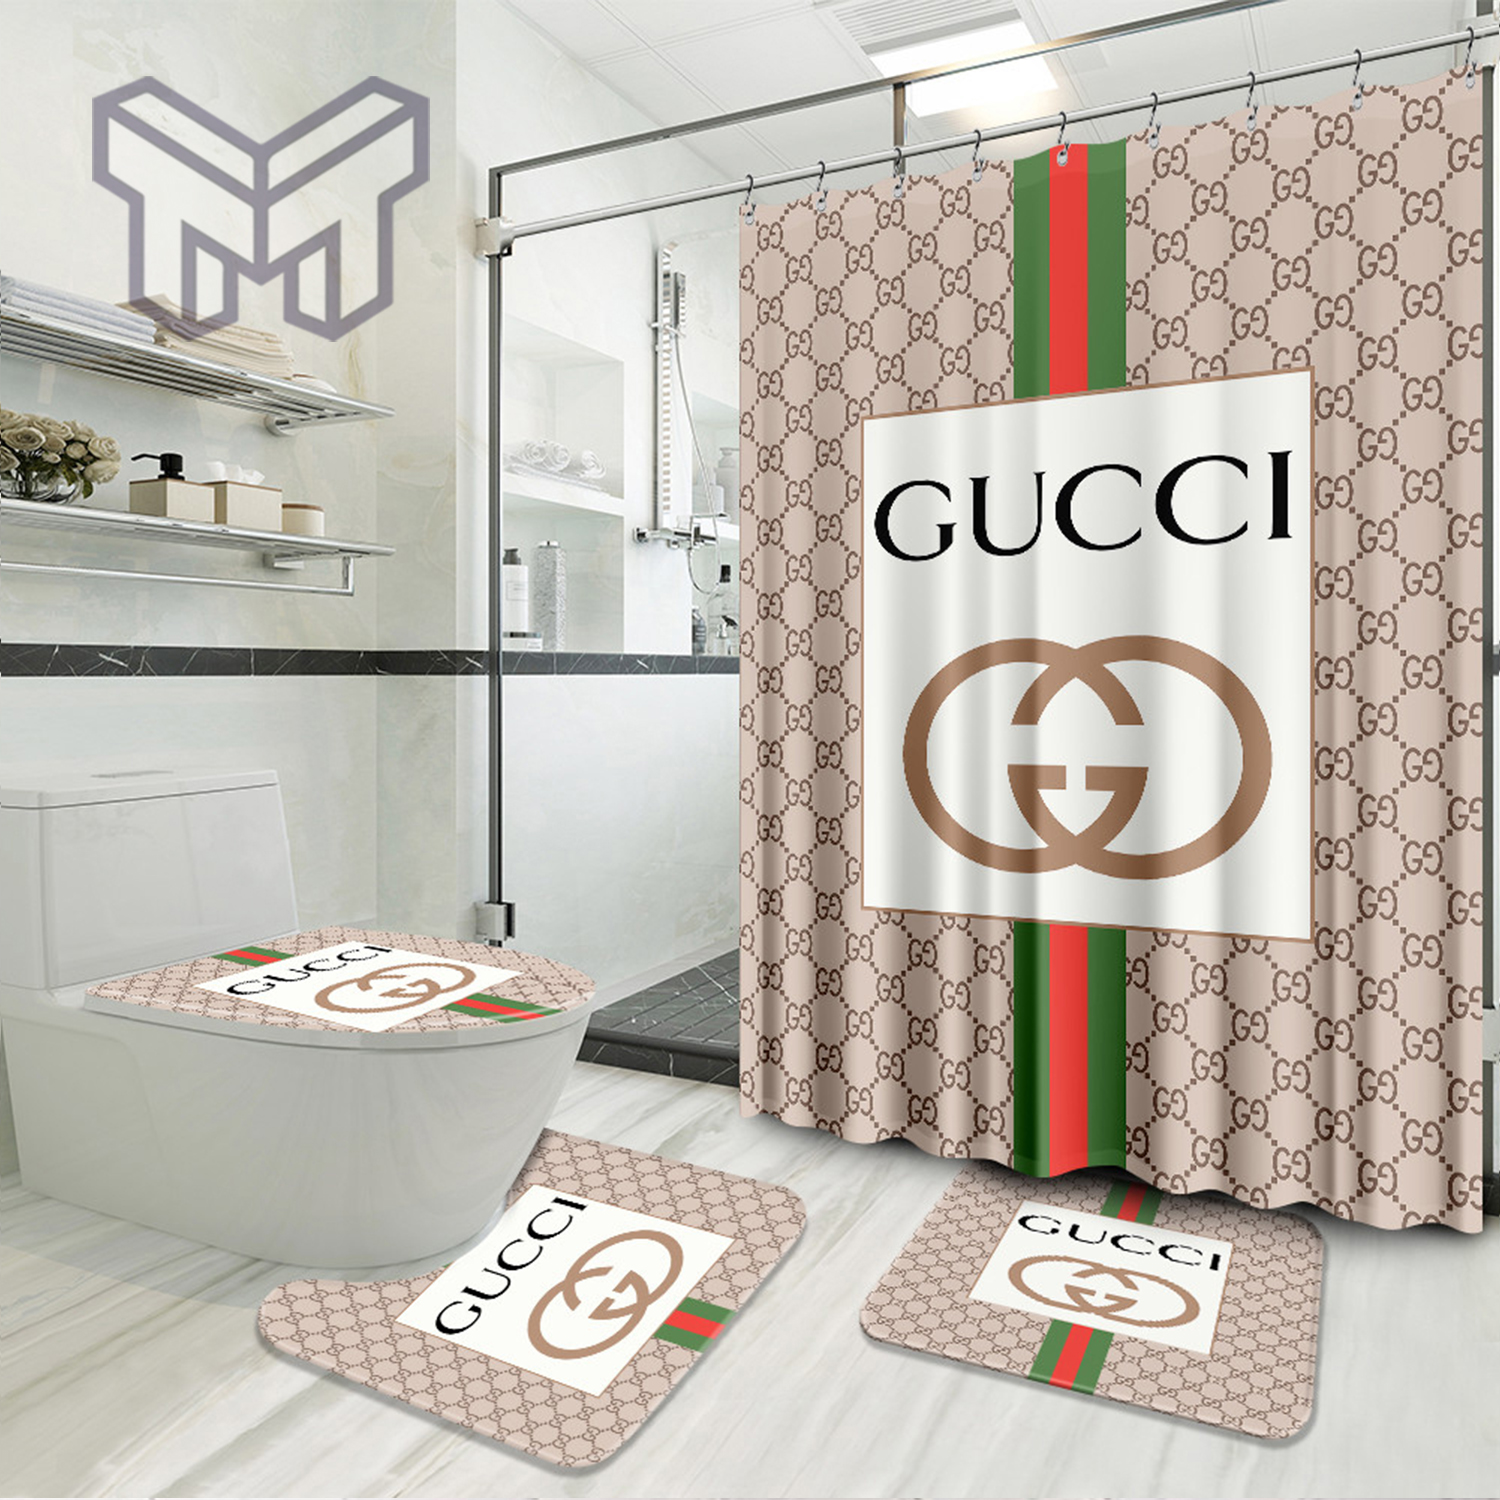 Gucci Luxury Bathroom Set White Black And Beige - Shower Curtain And Rug  Toilet Seat Lid Covers Bathroom Set - Infinite Creativity. Spend Less.  Smile More